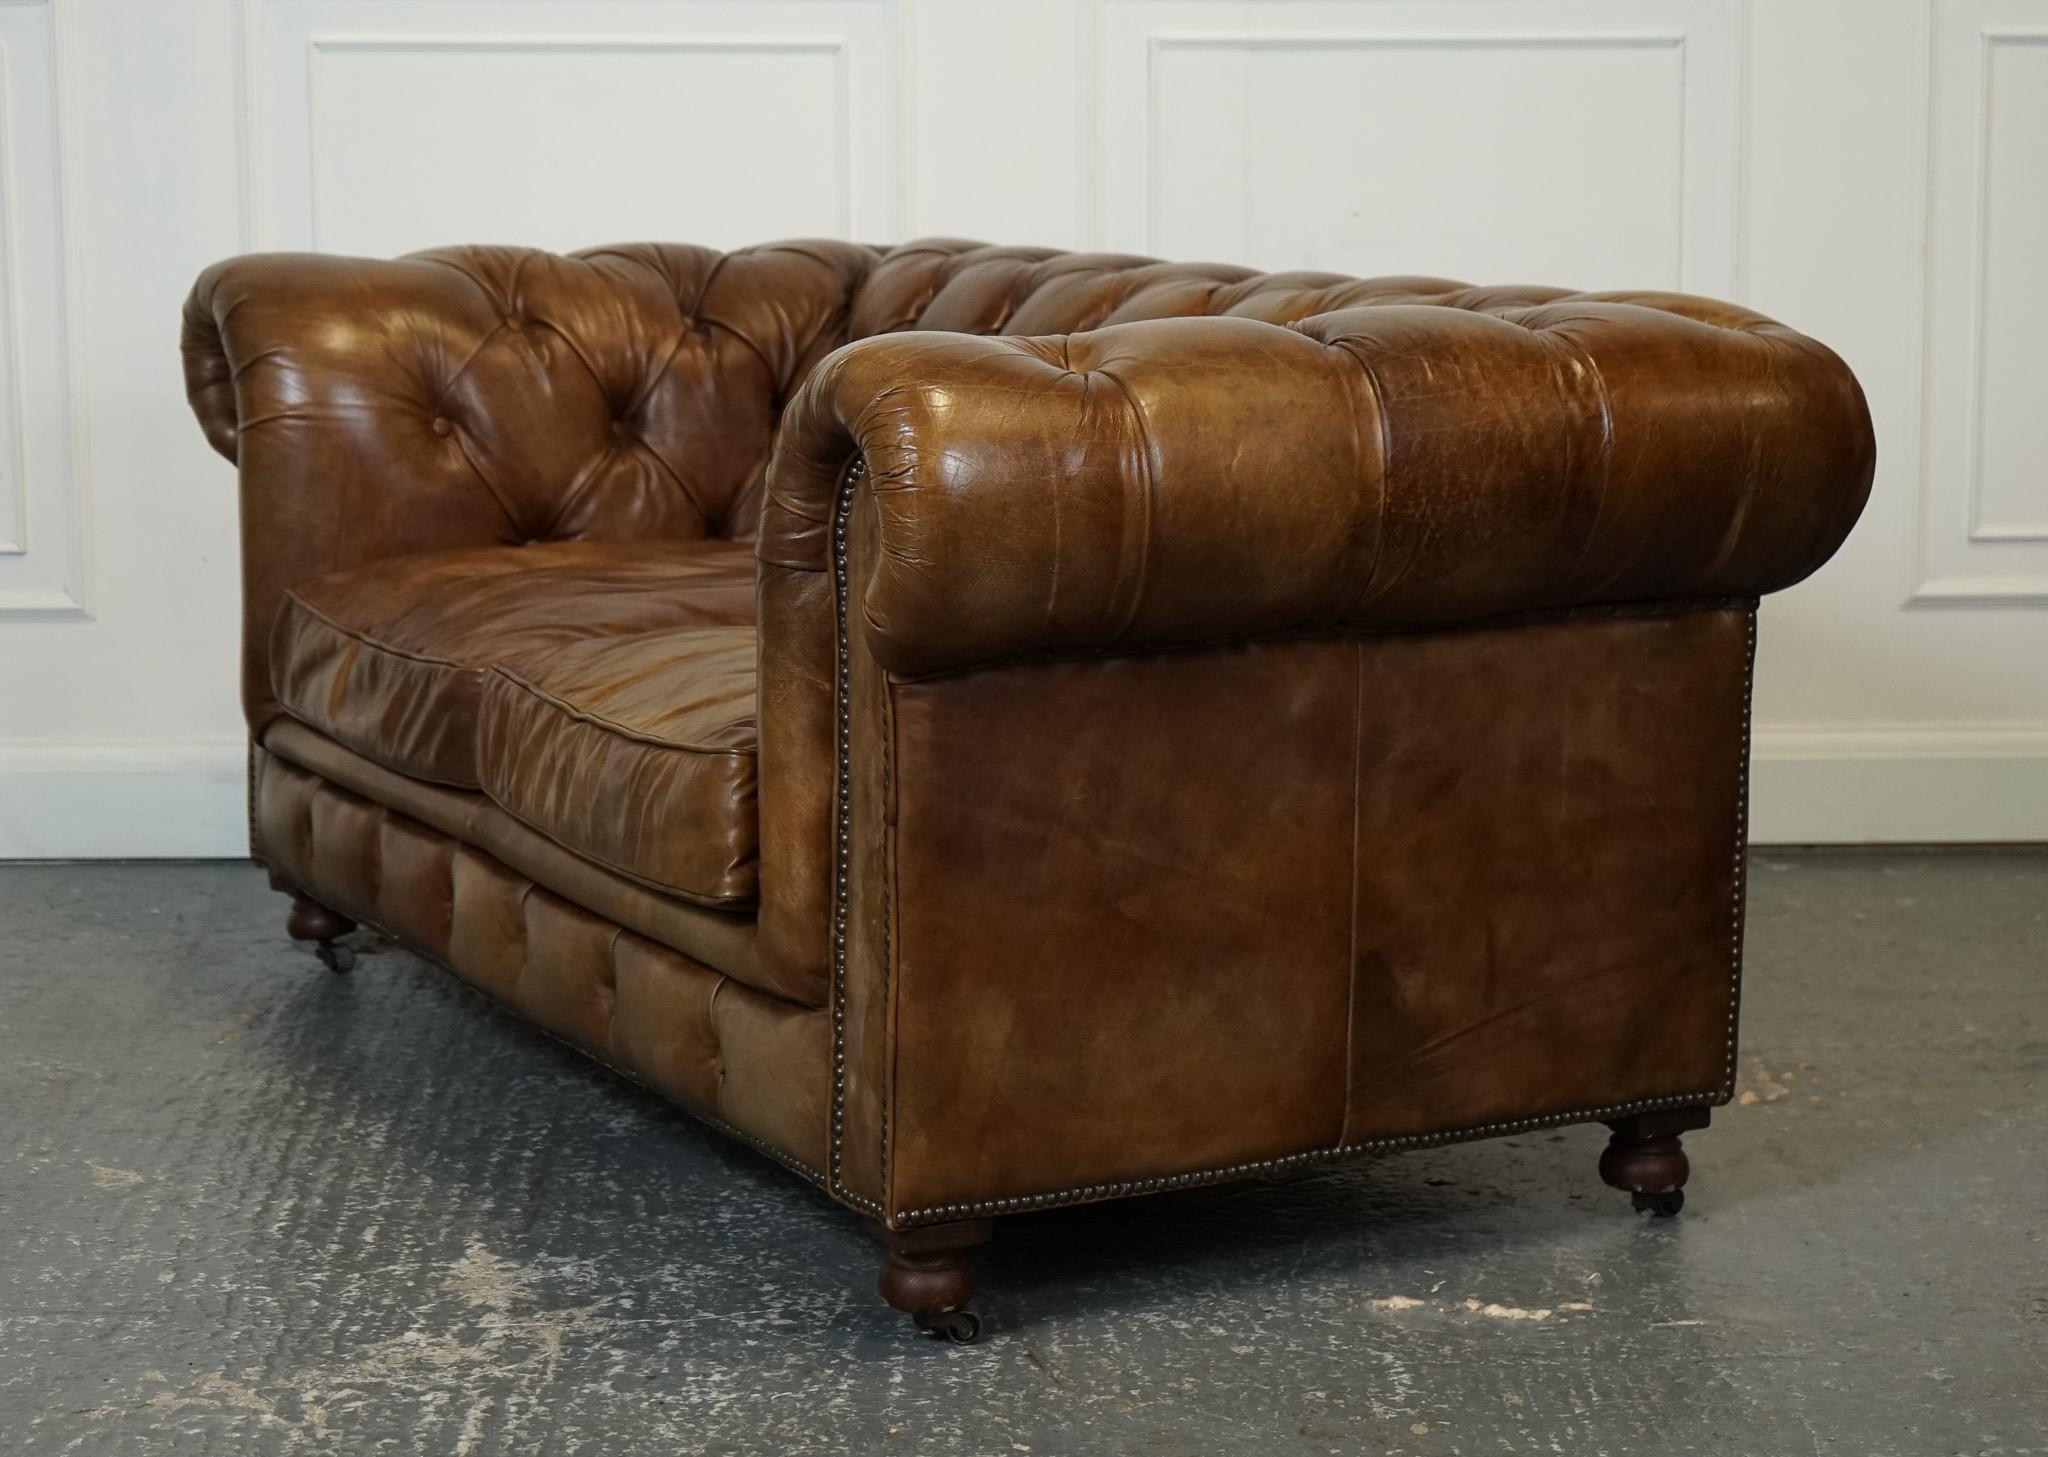 GORGEOUS TIMOTHY OULTON CHESTERFIELD SOFA BY HALO HERiTAGE BROWN LEATHER J1 For Sale 1